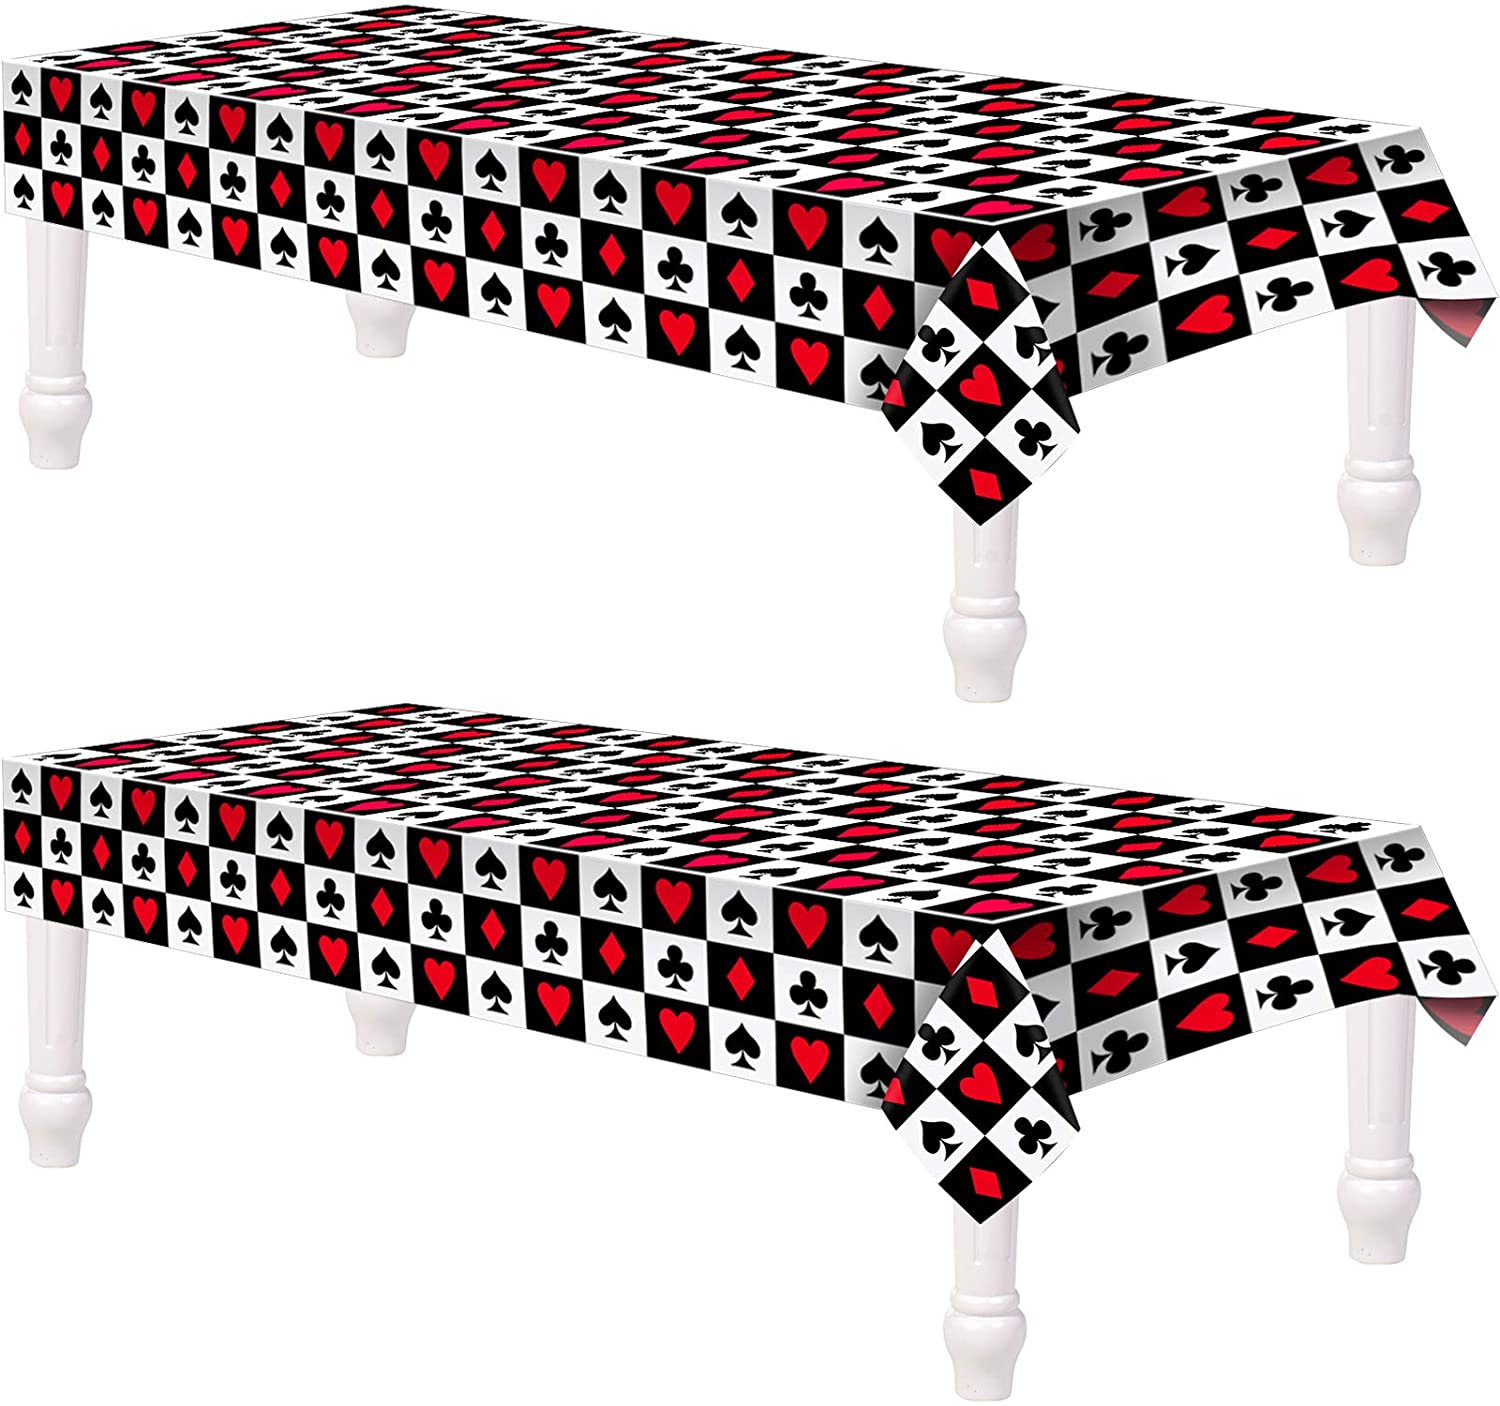 Casino Bridge Poker Party Table covering table cloth